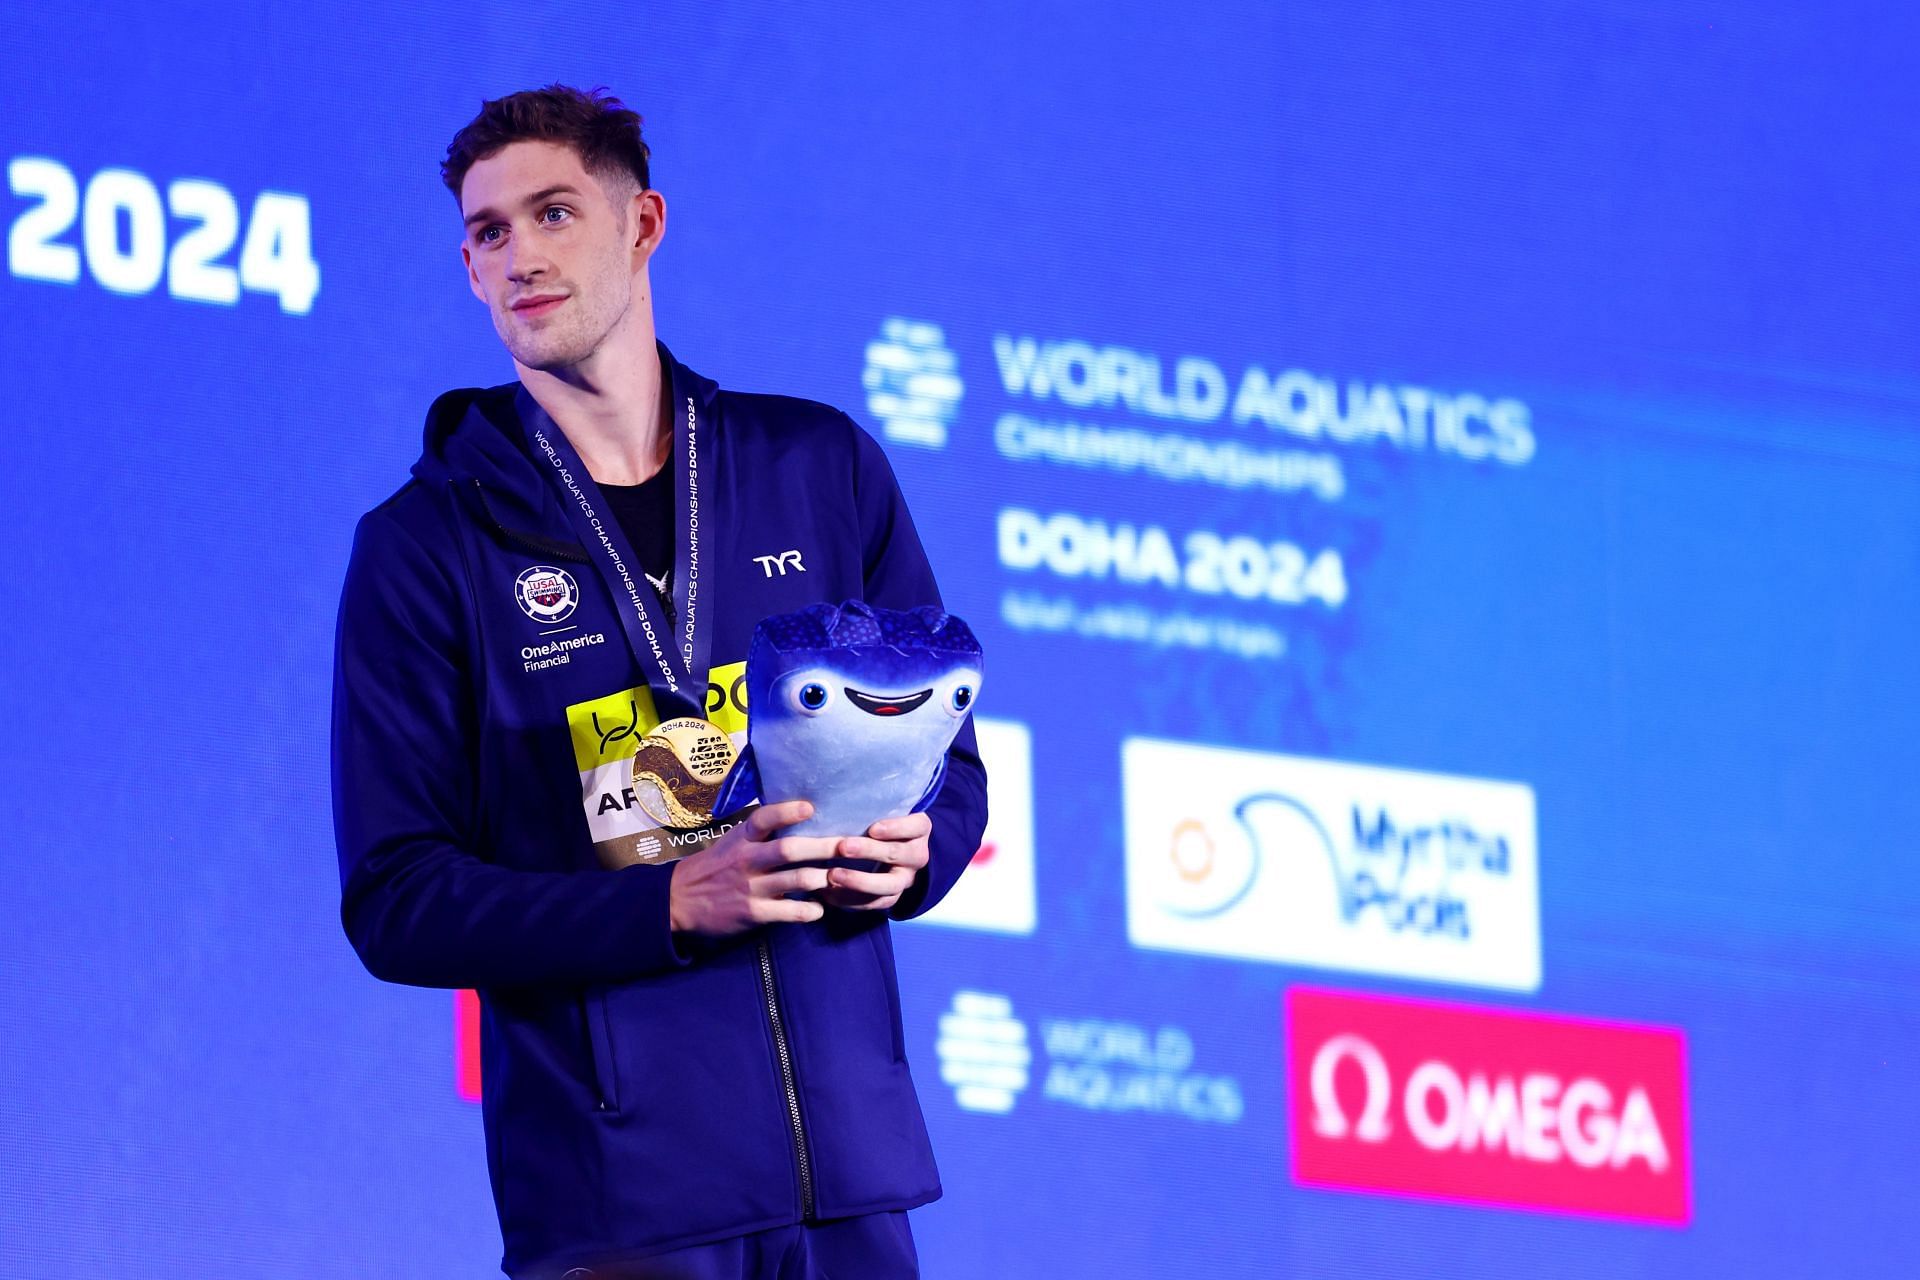 2024 World Aquatics Championships - Armstrong wins the gold medal at the Doha on Day 12: Swimming